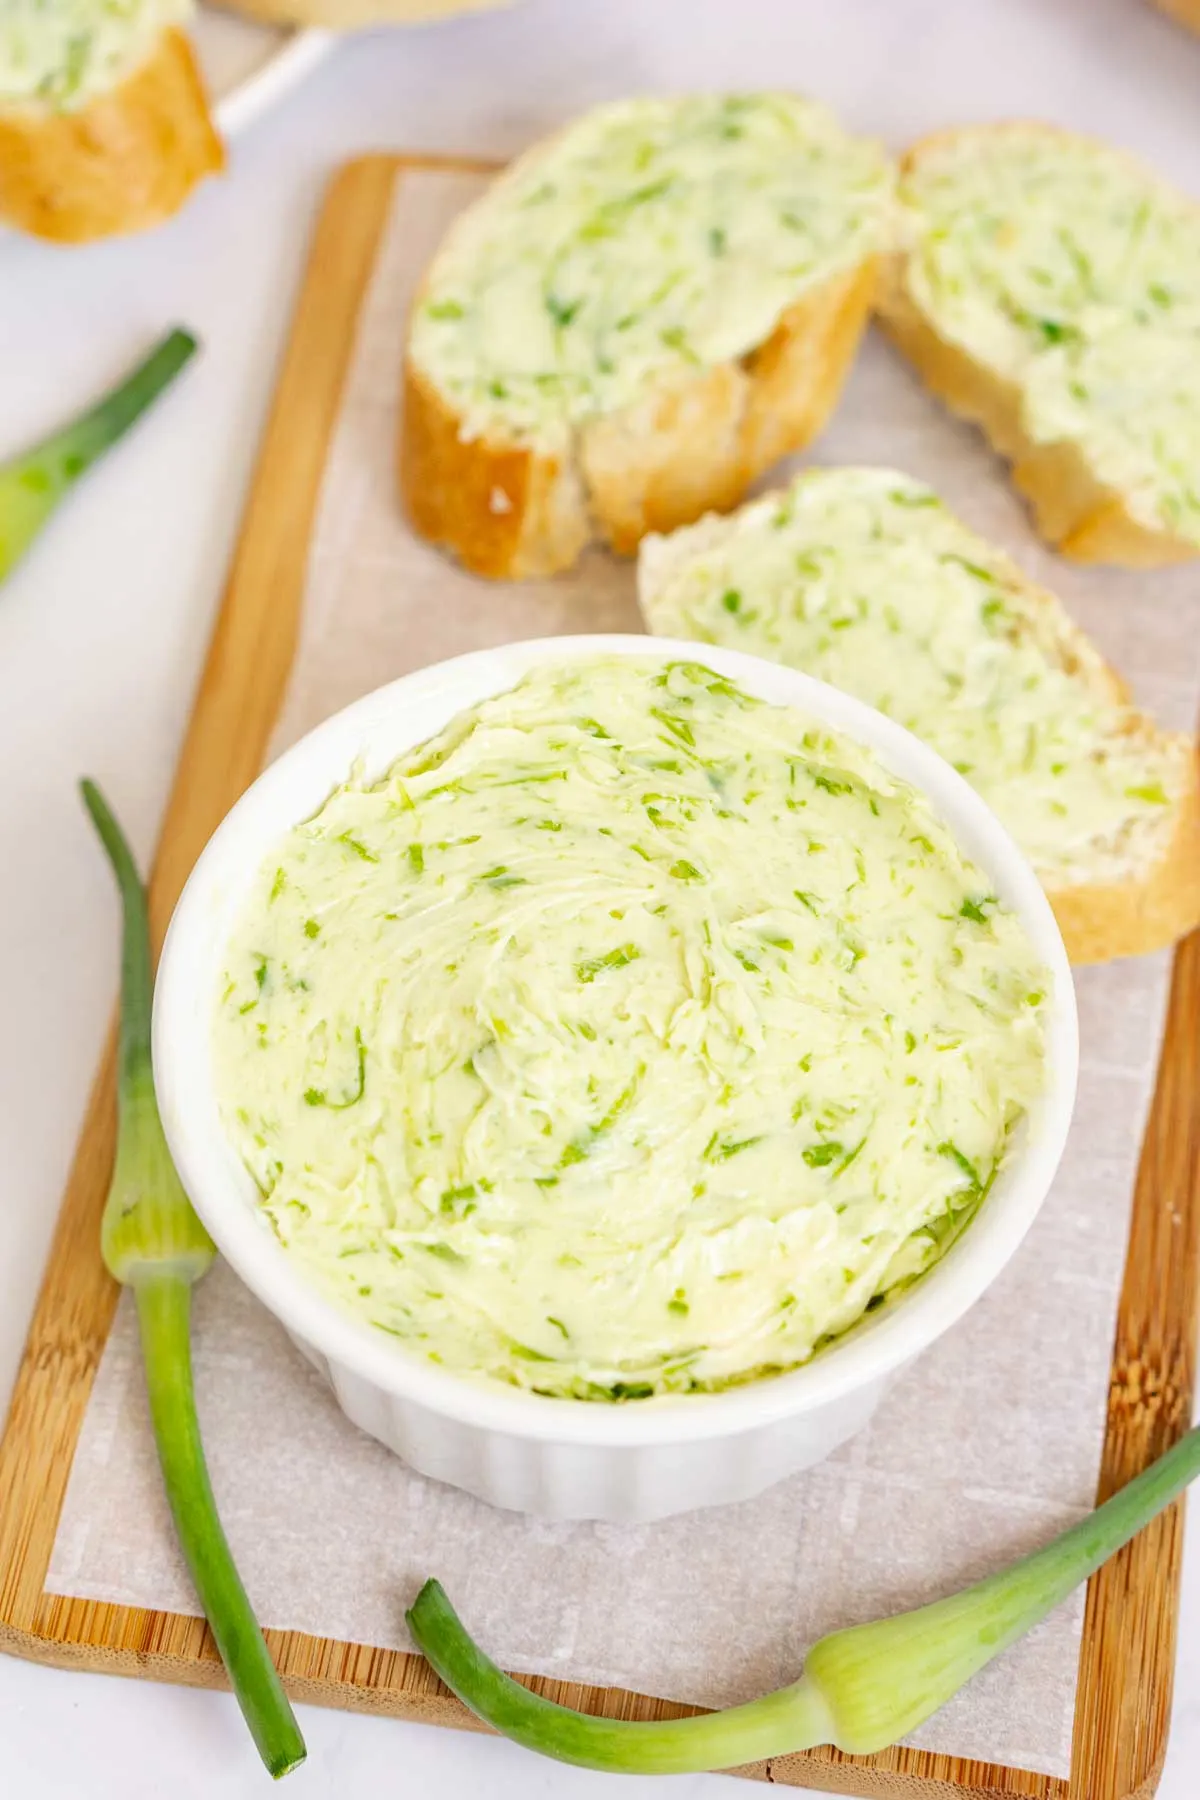 Garlic scape compound butter in a bowl with buttered toasts